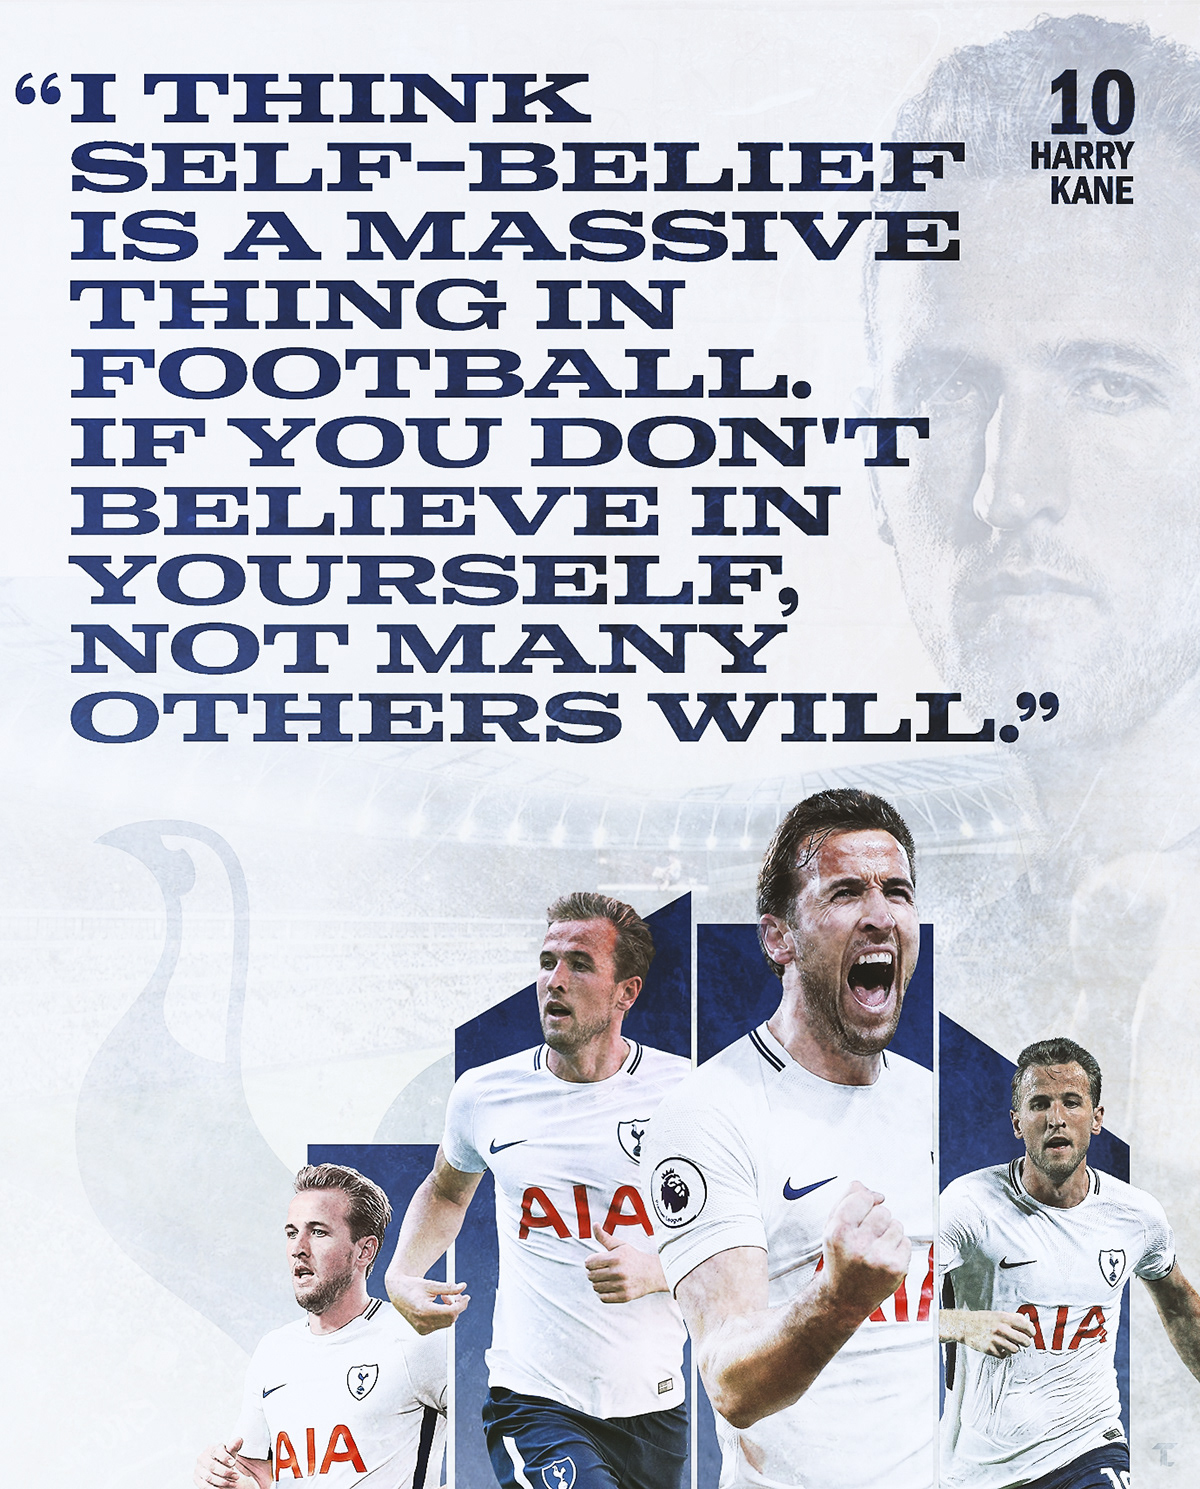 11 Harry Kane English Football Player Poster Sport Star Photo Motivation Quote